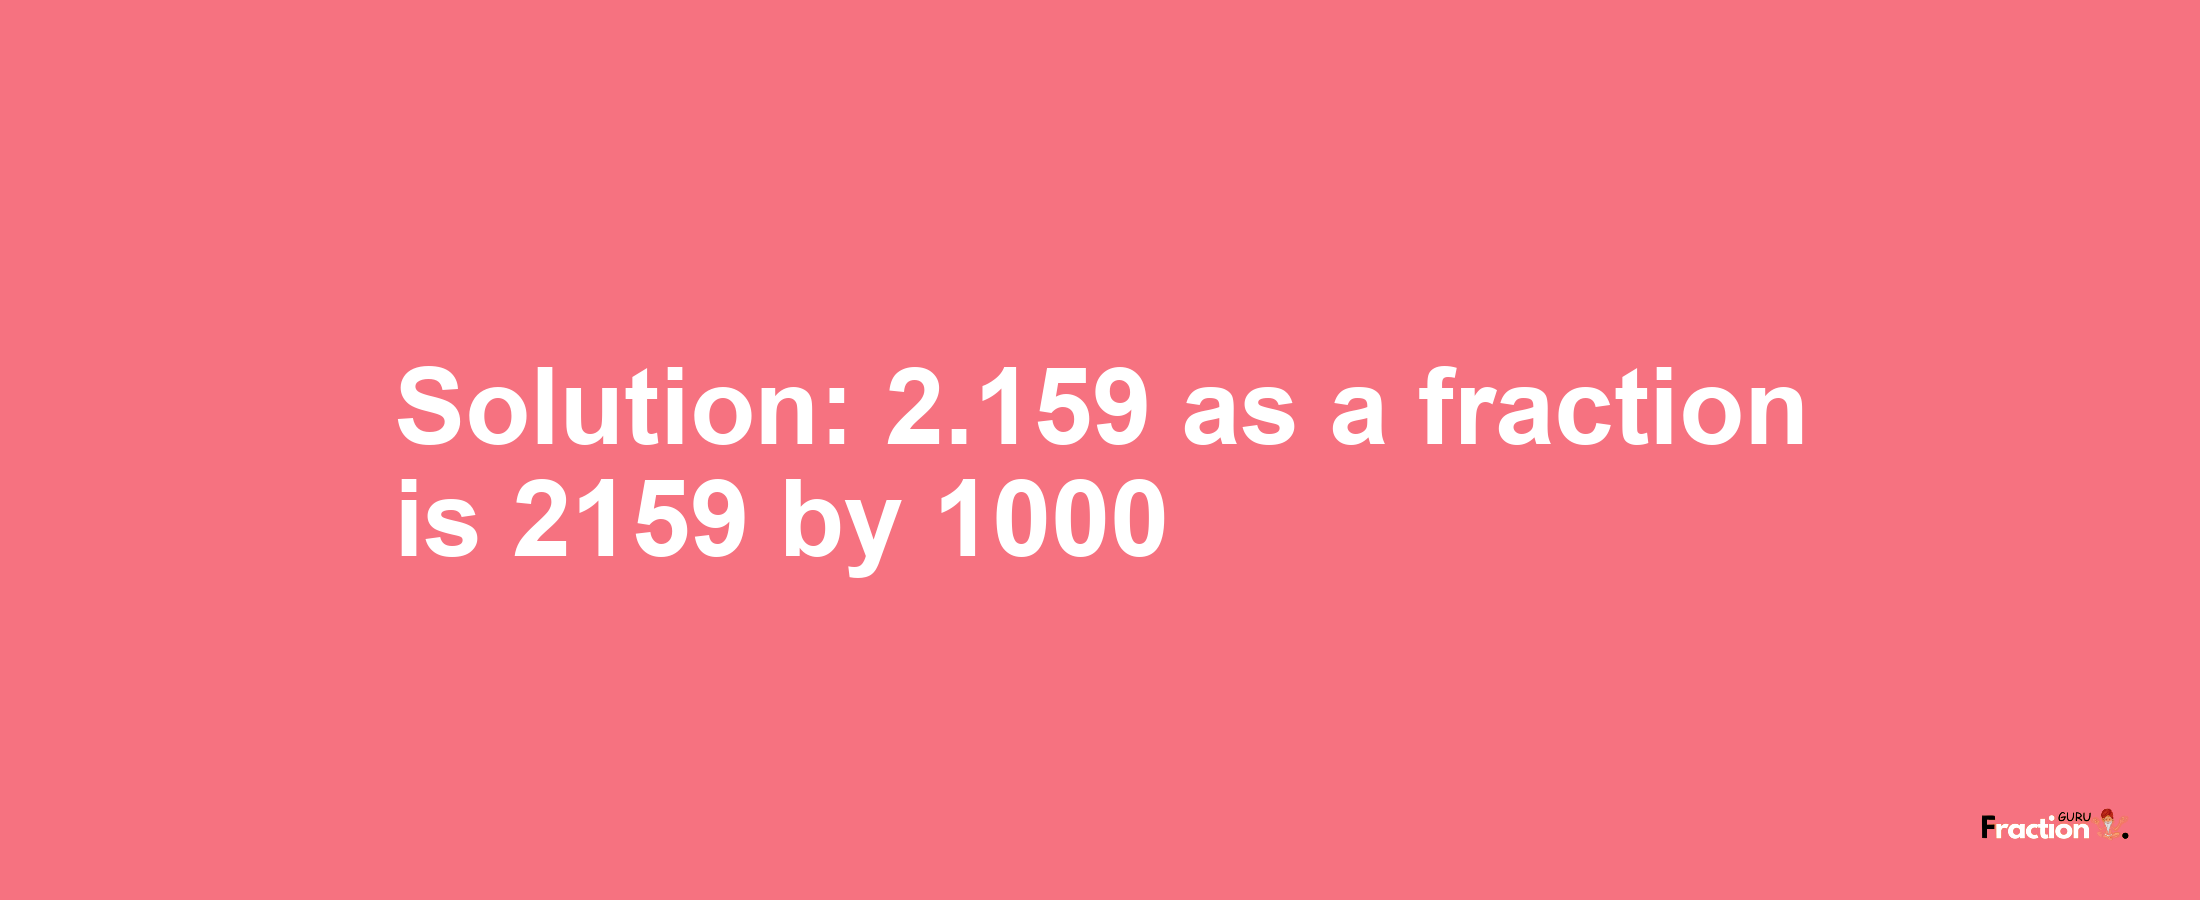 Solution:2.159 as a fraction is 2159/1000